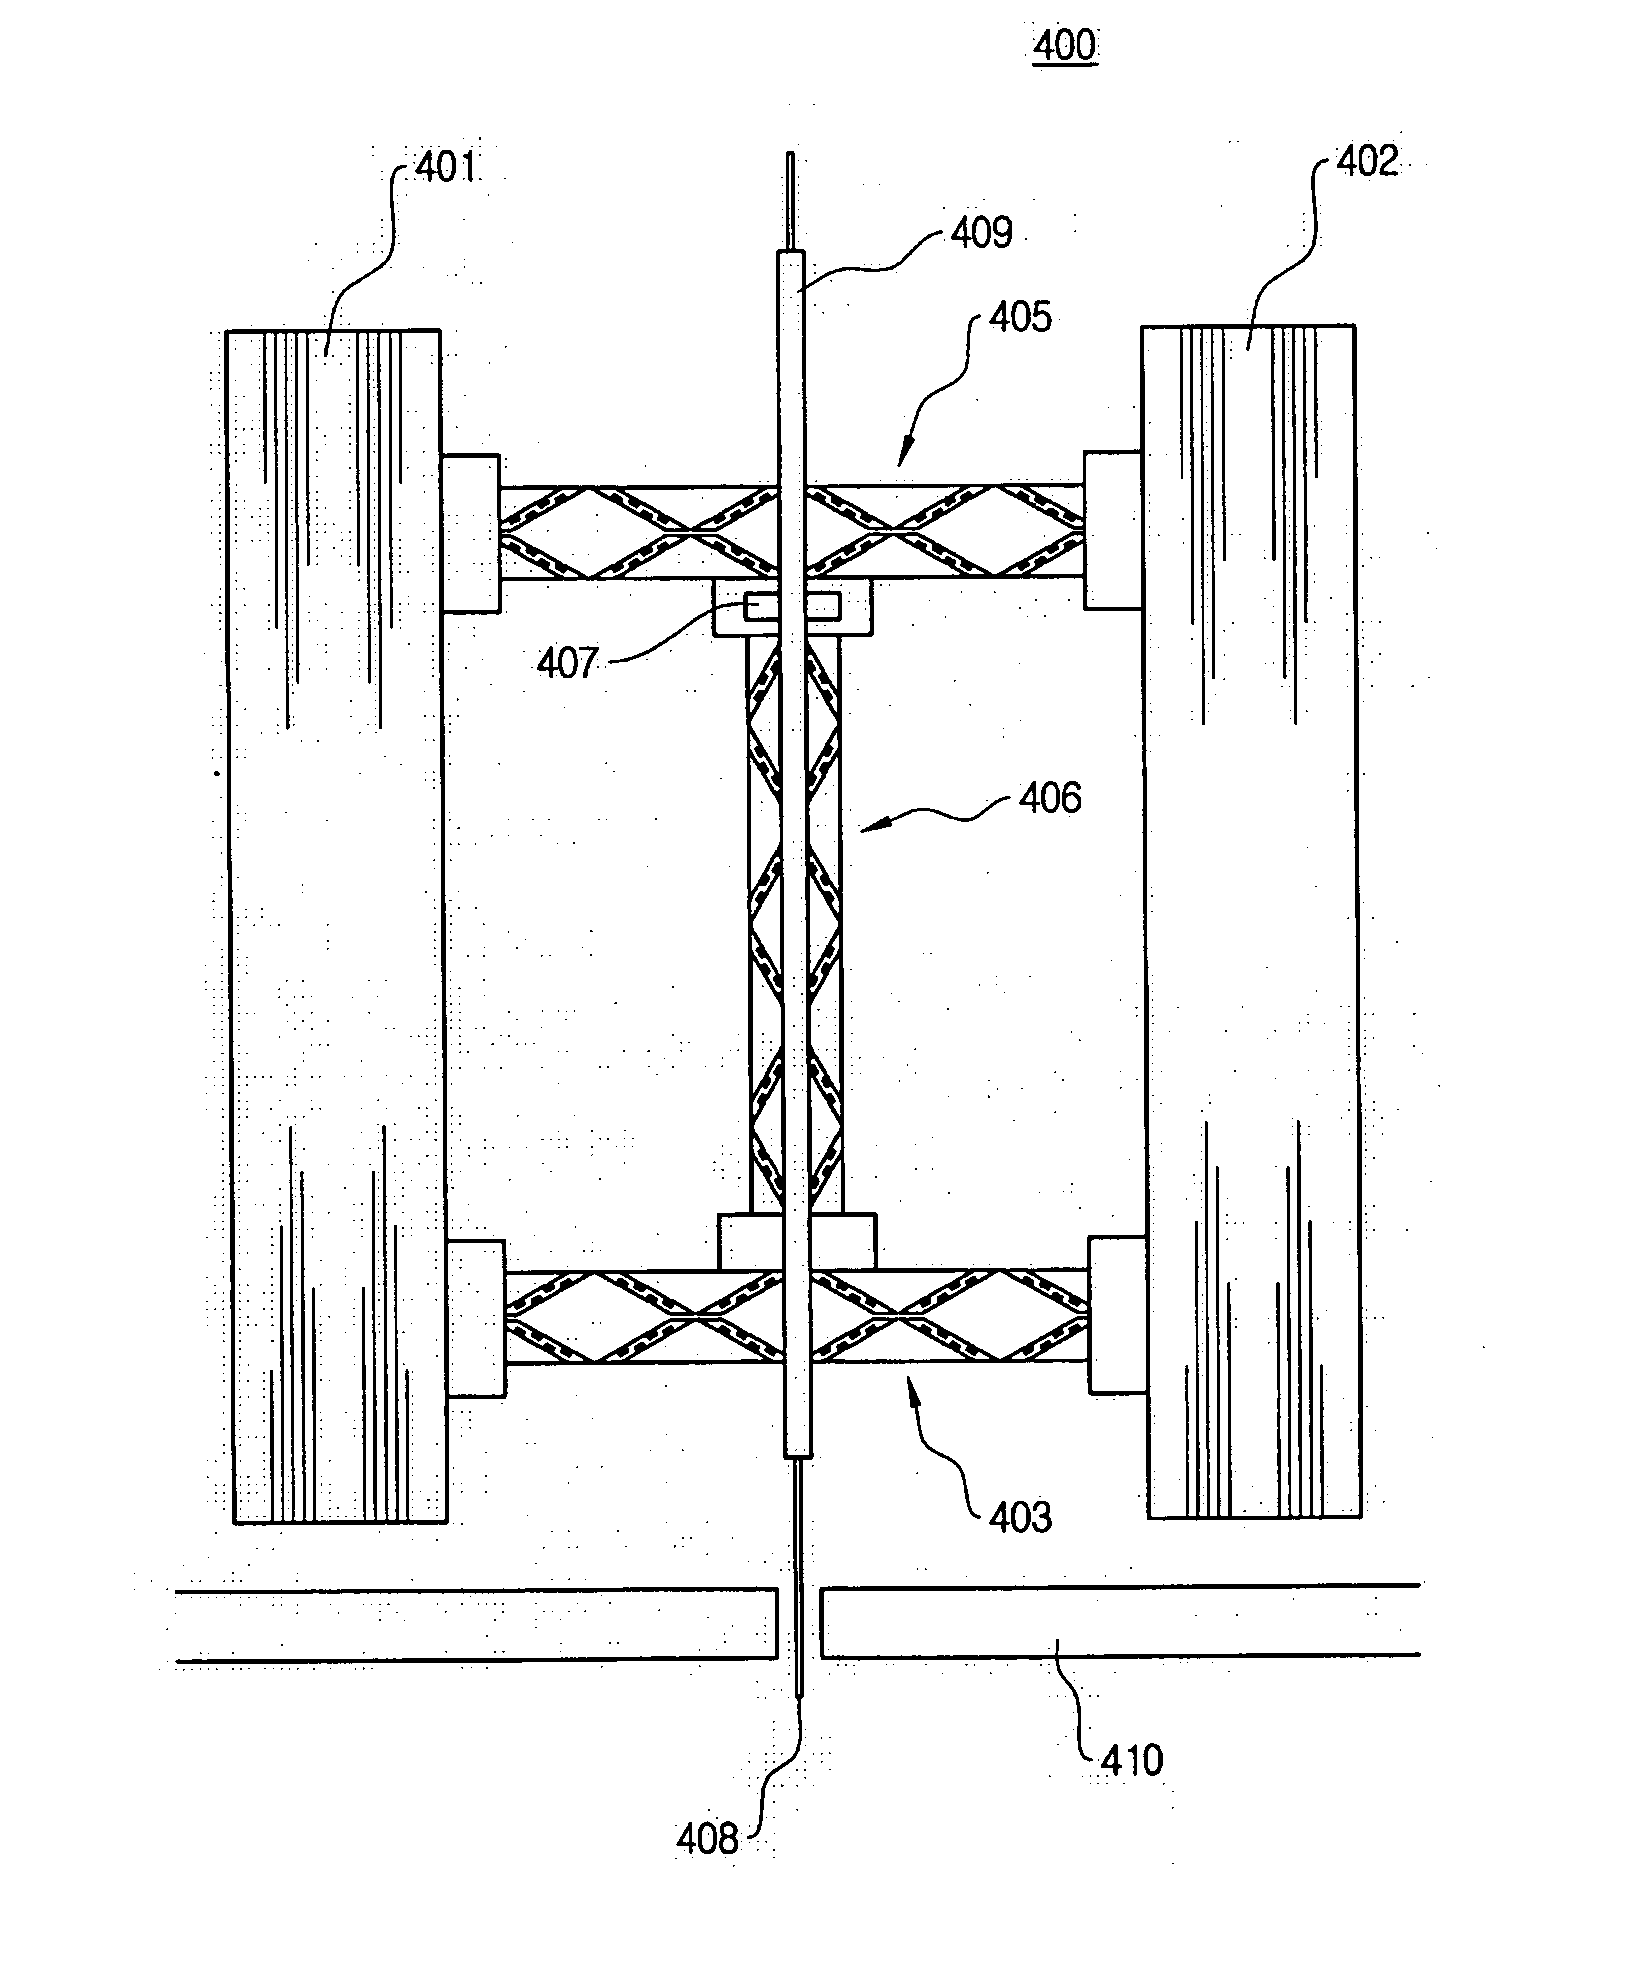 Polymer linear actuator for micro electro mechanical system and micro manipulator for measurement device of cranial nerve signal using the same